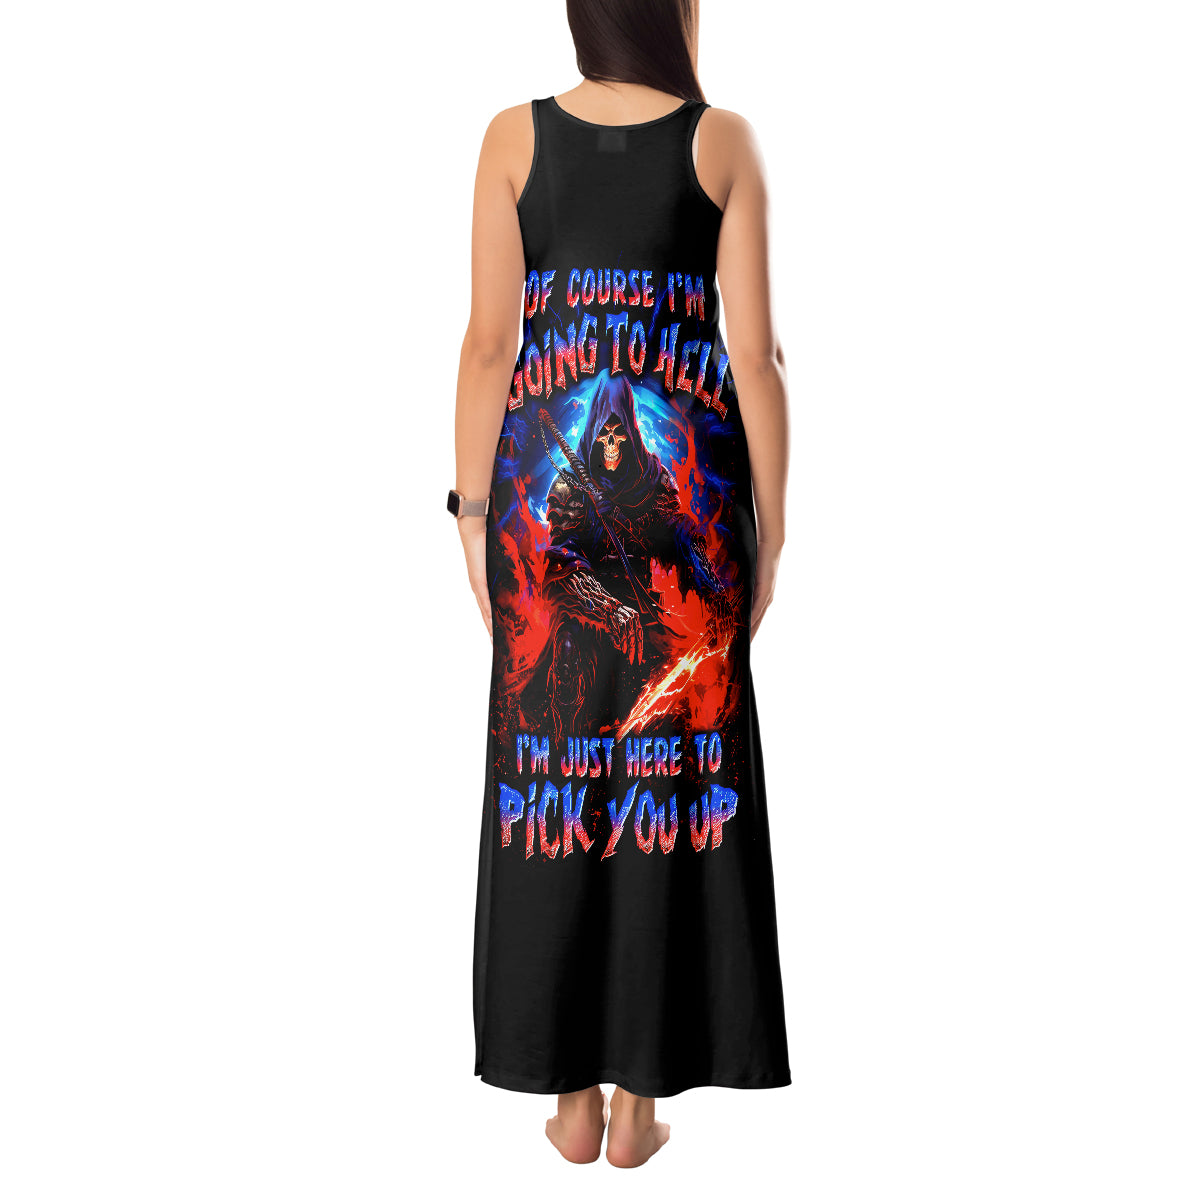 death-skull-tank-maxi-dress-of-course-im-going-to-hell